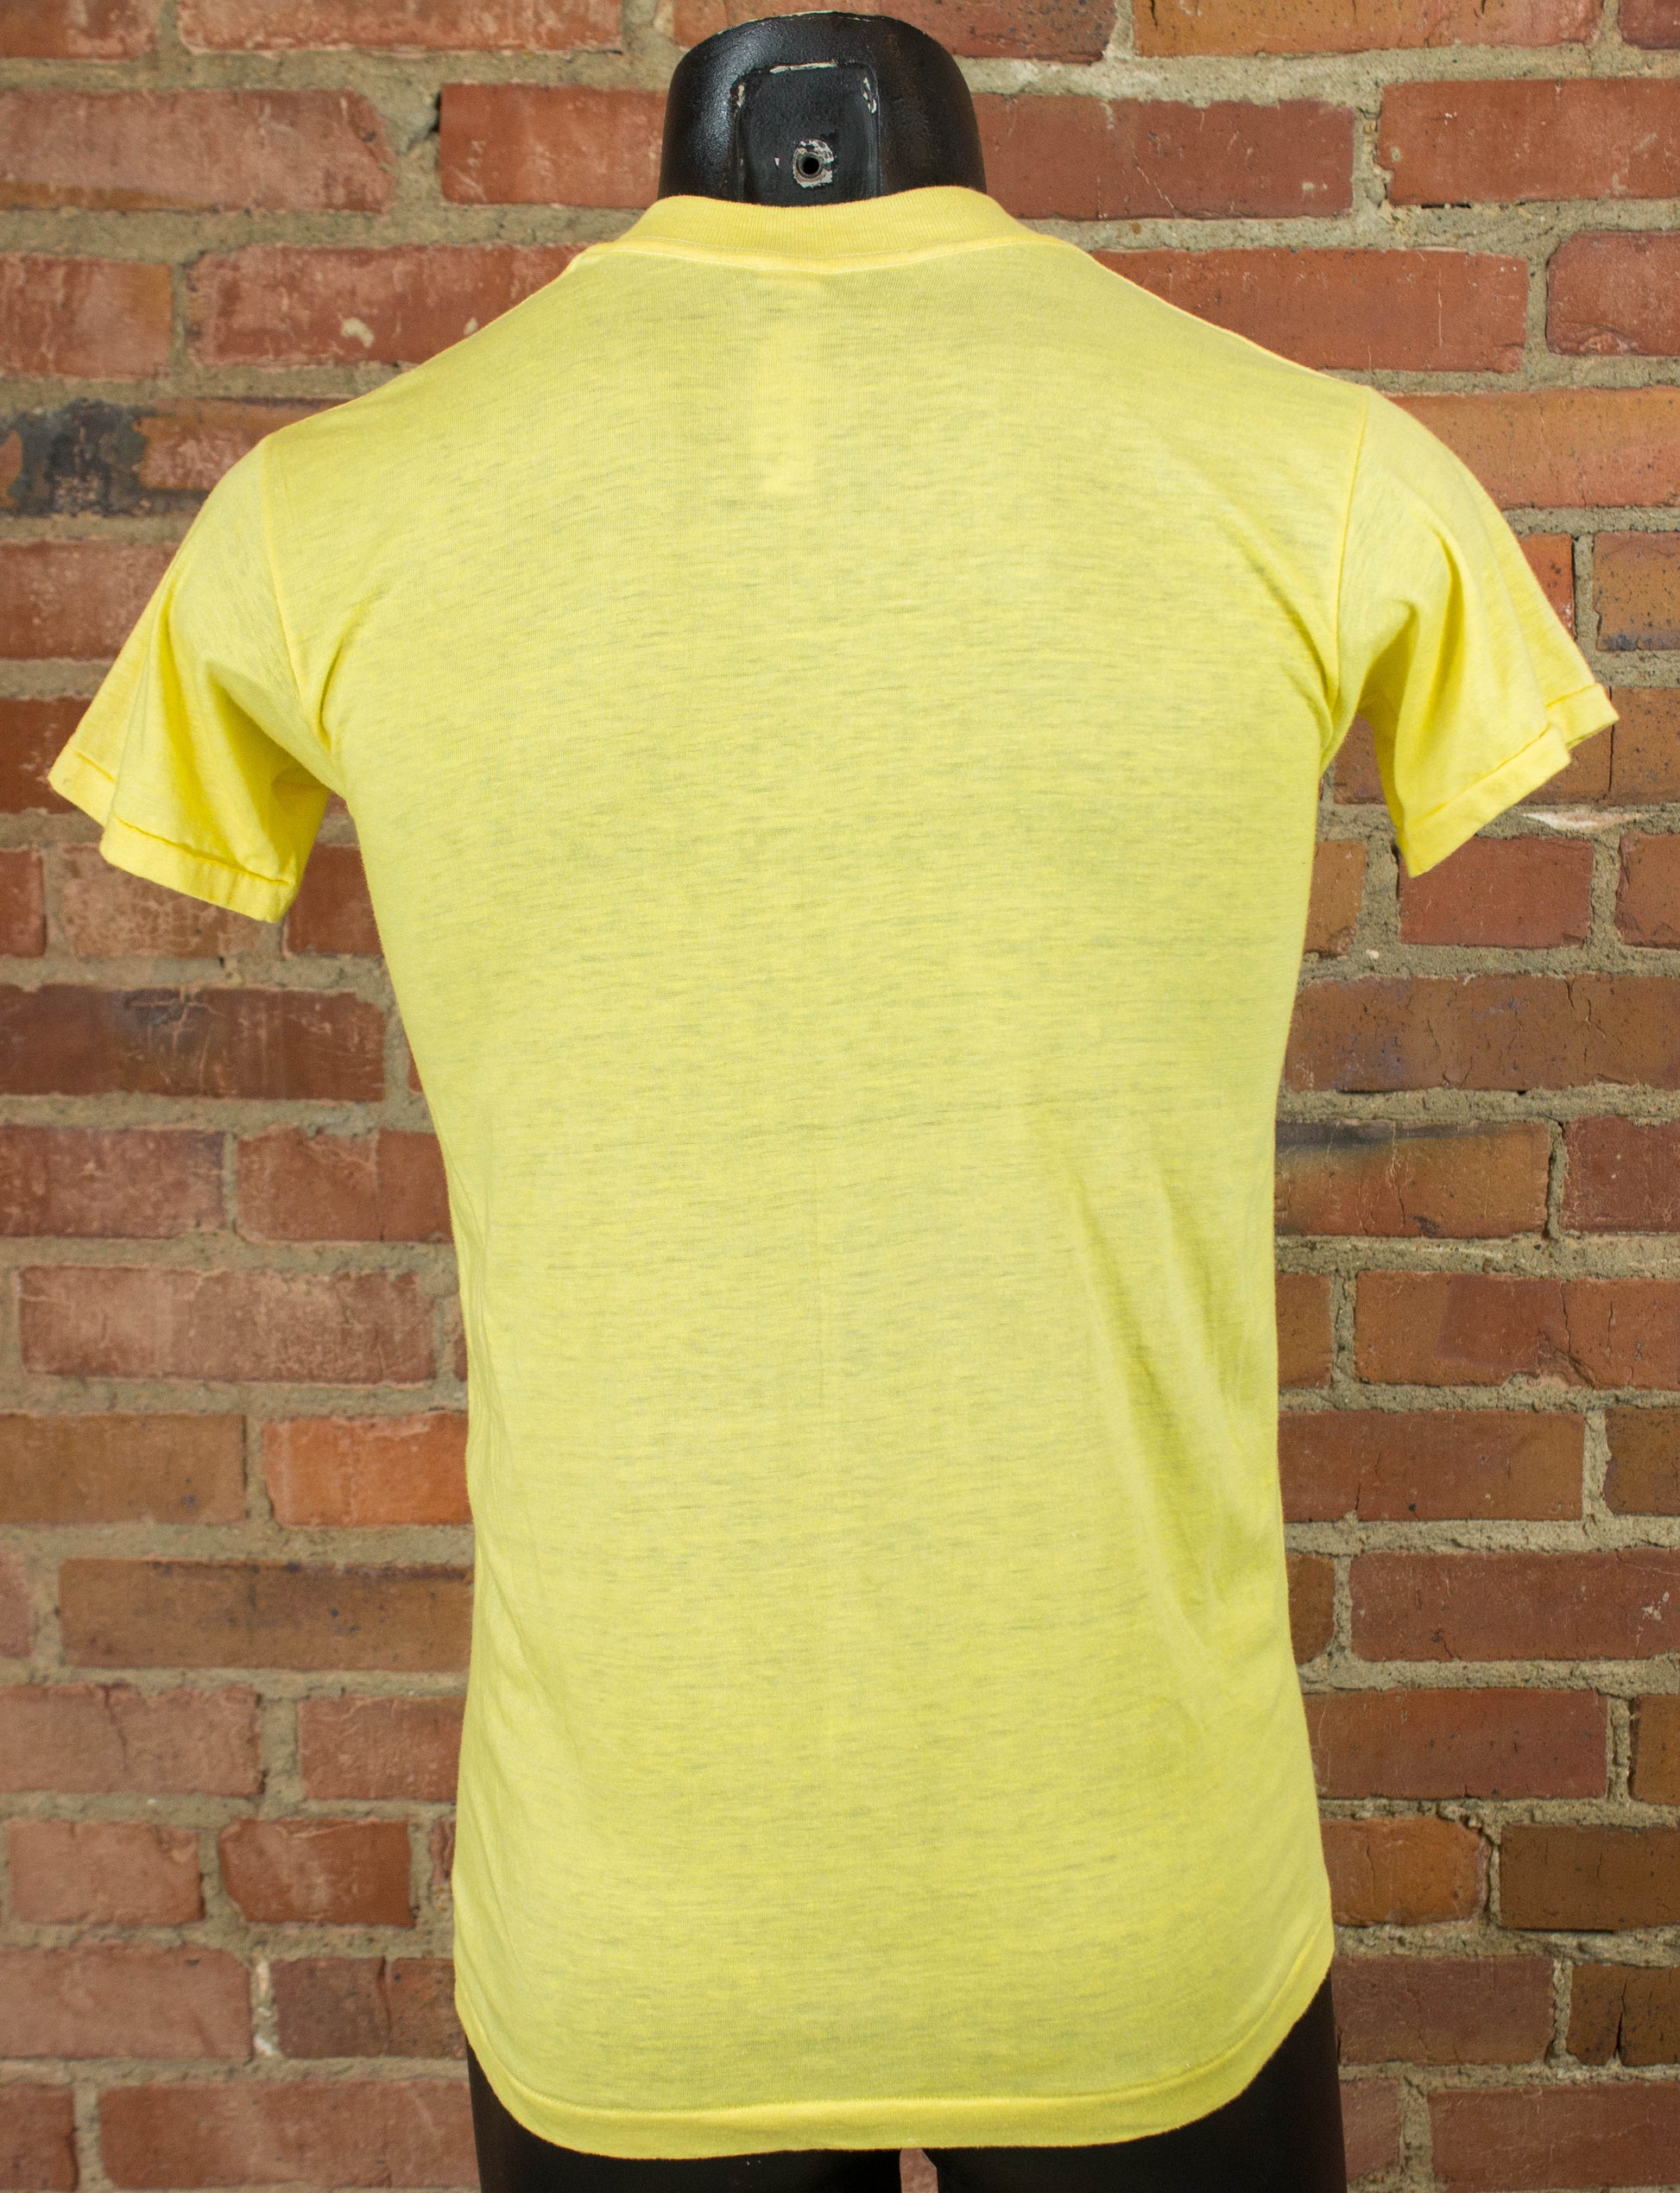 Vintage 80s Tennessee Hairdressers and Cosmetologists Association Yellow Graphic T Shirt Unisex Small